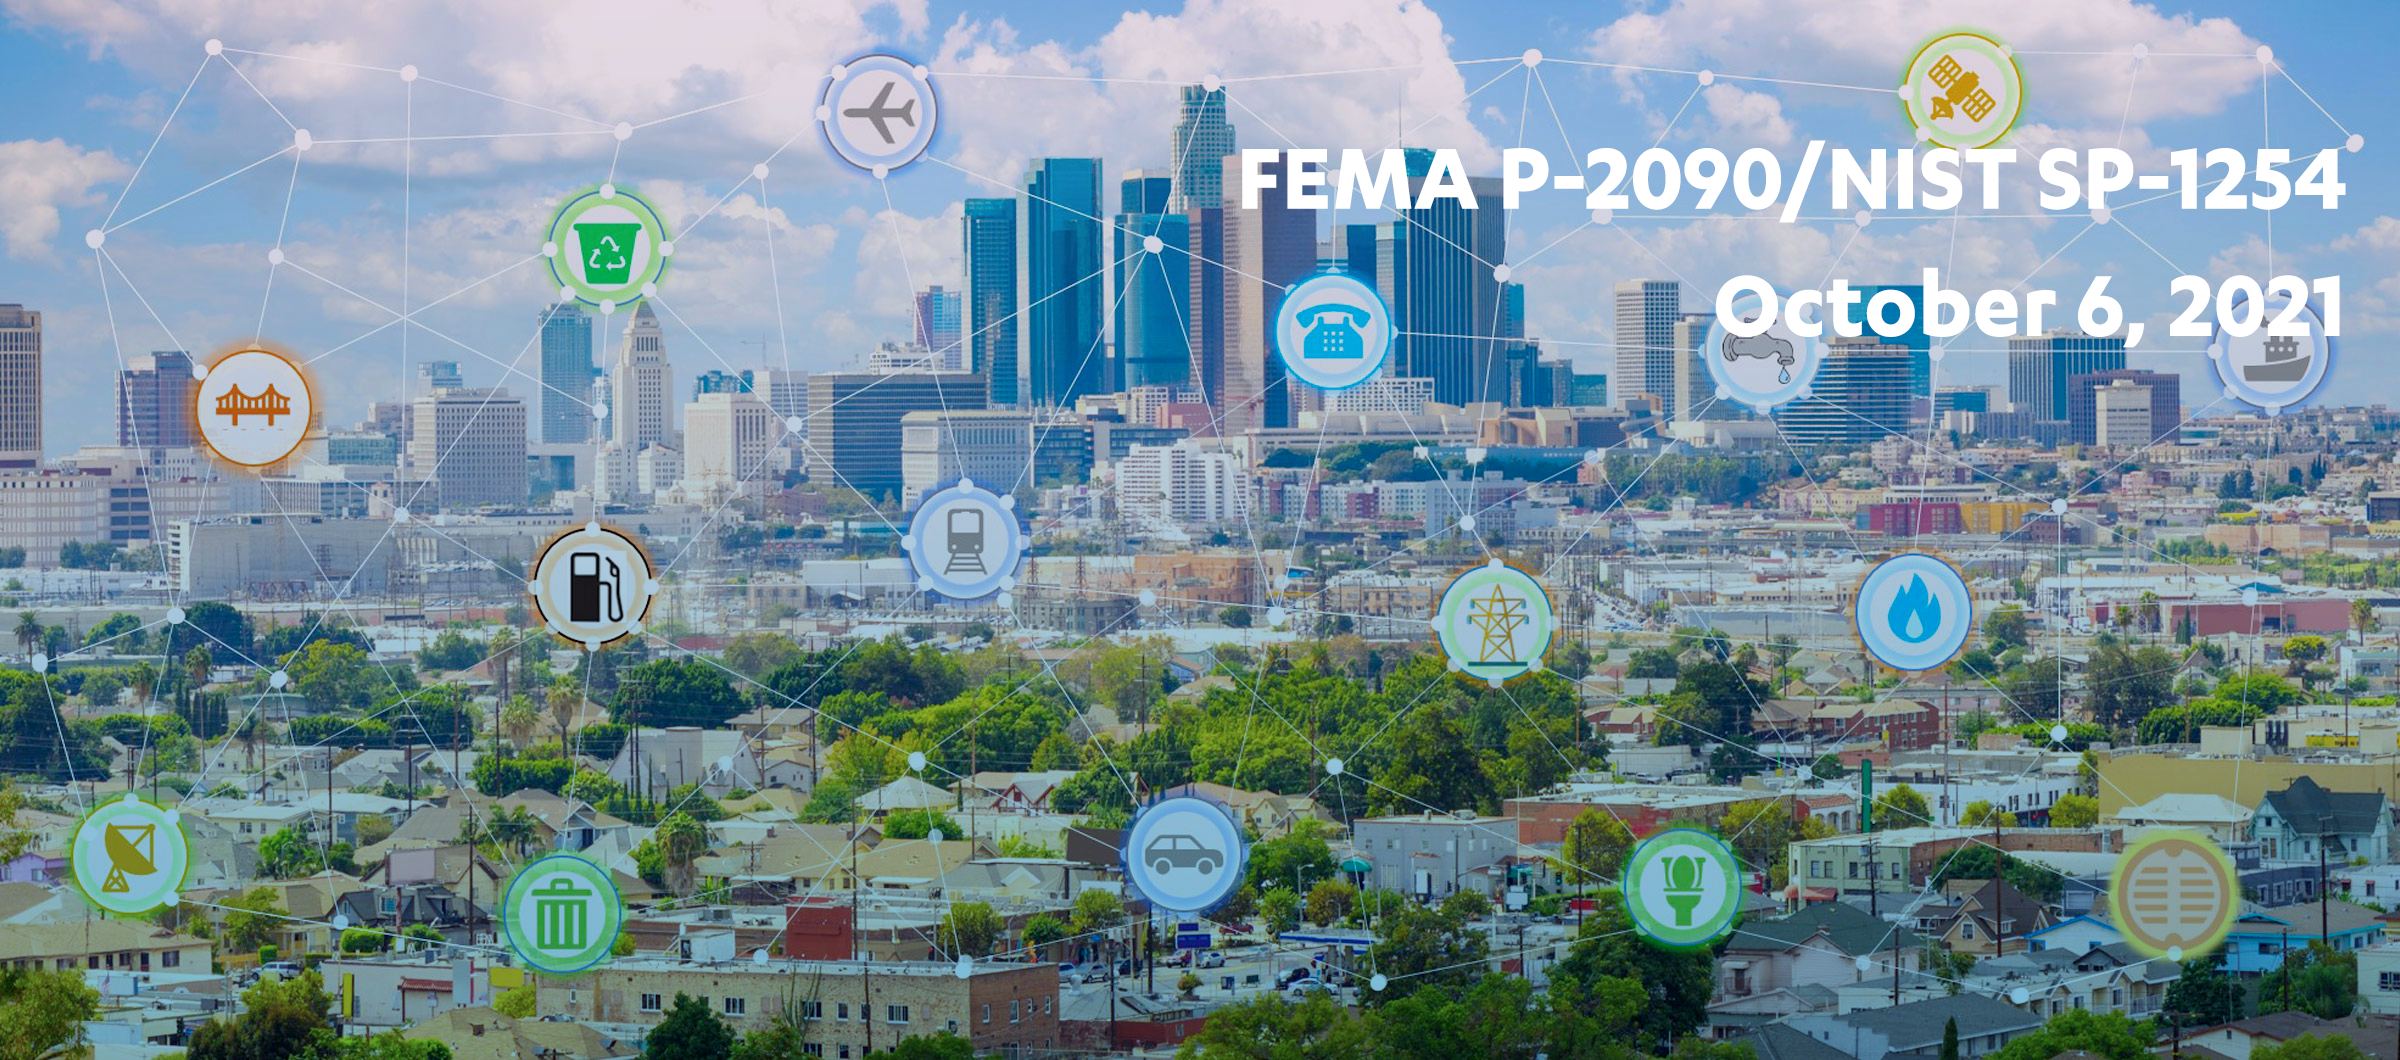 In white text, says FEMA P-2090/NIST SP-1254 and October 6, 2021. The image is of the Los Angeles cityscape with utility icons on top